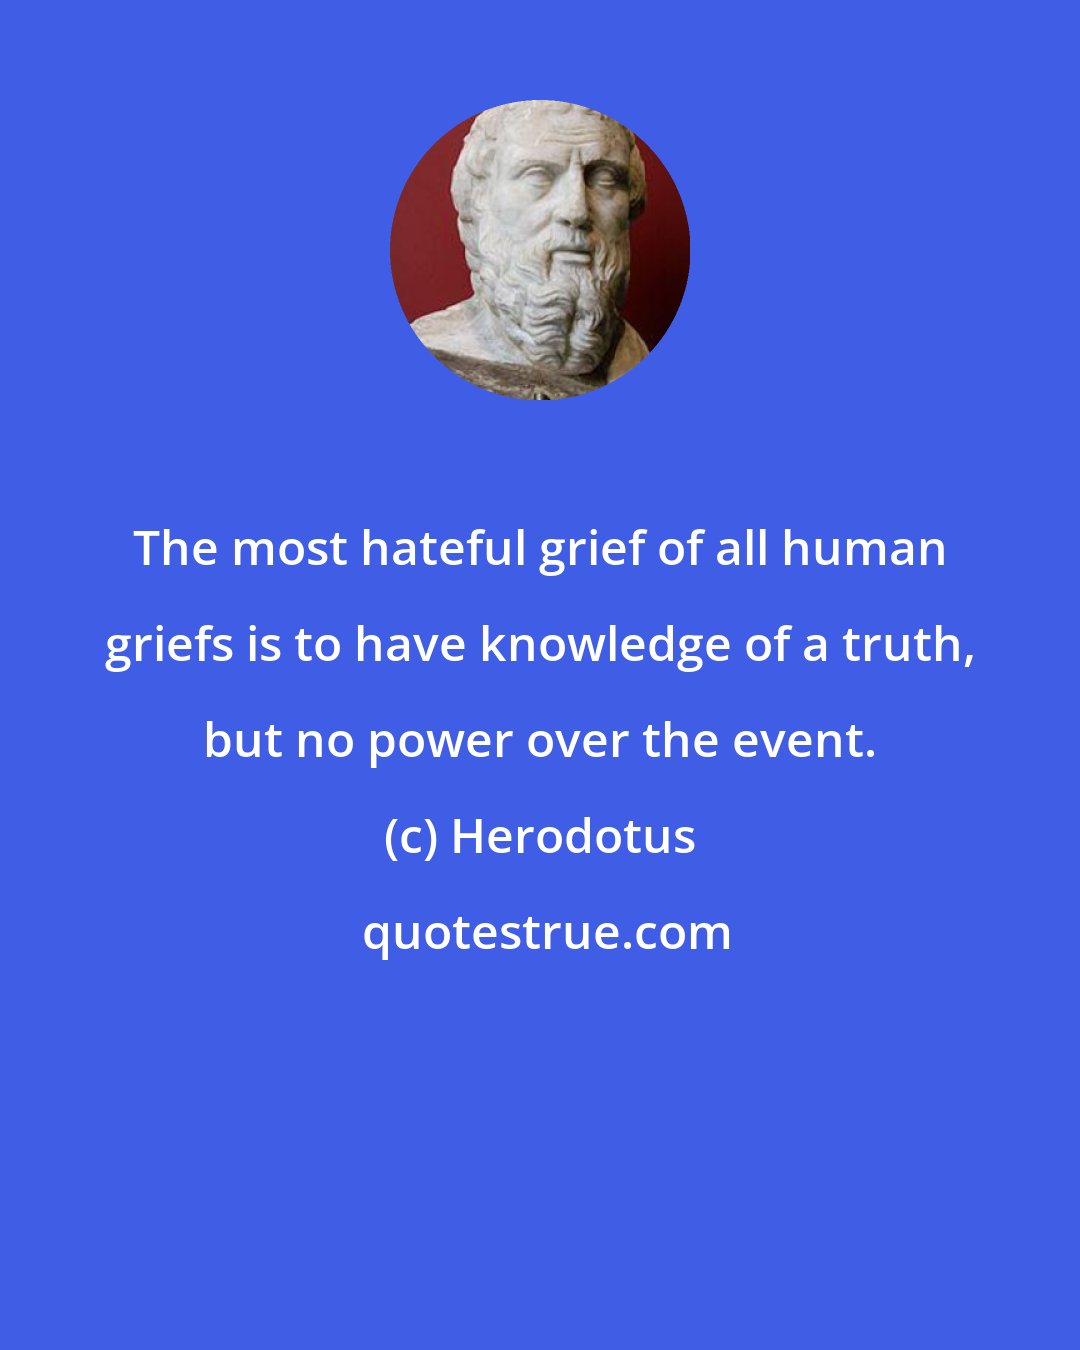 Herodotus: The most hateful grief of all human griefs is to have knowledge of a truth, but no power over the event.